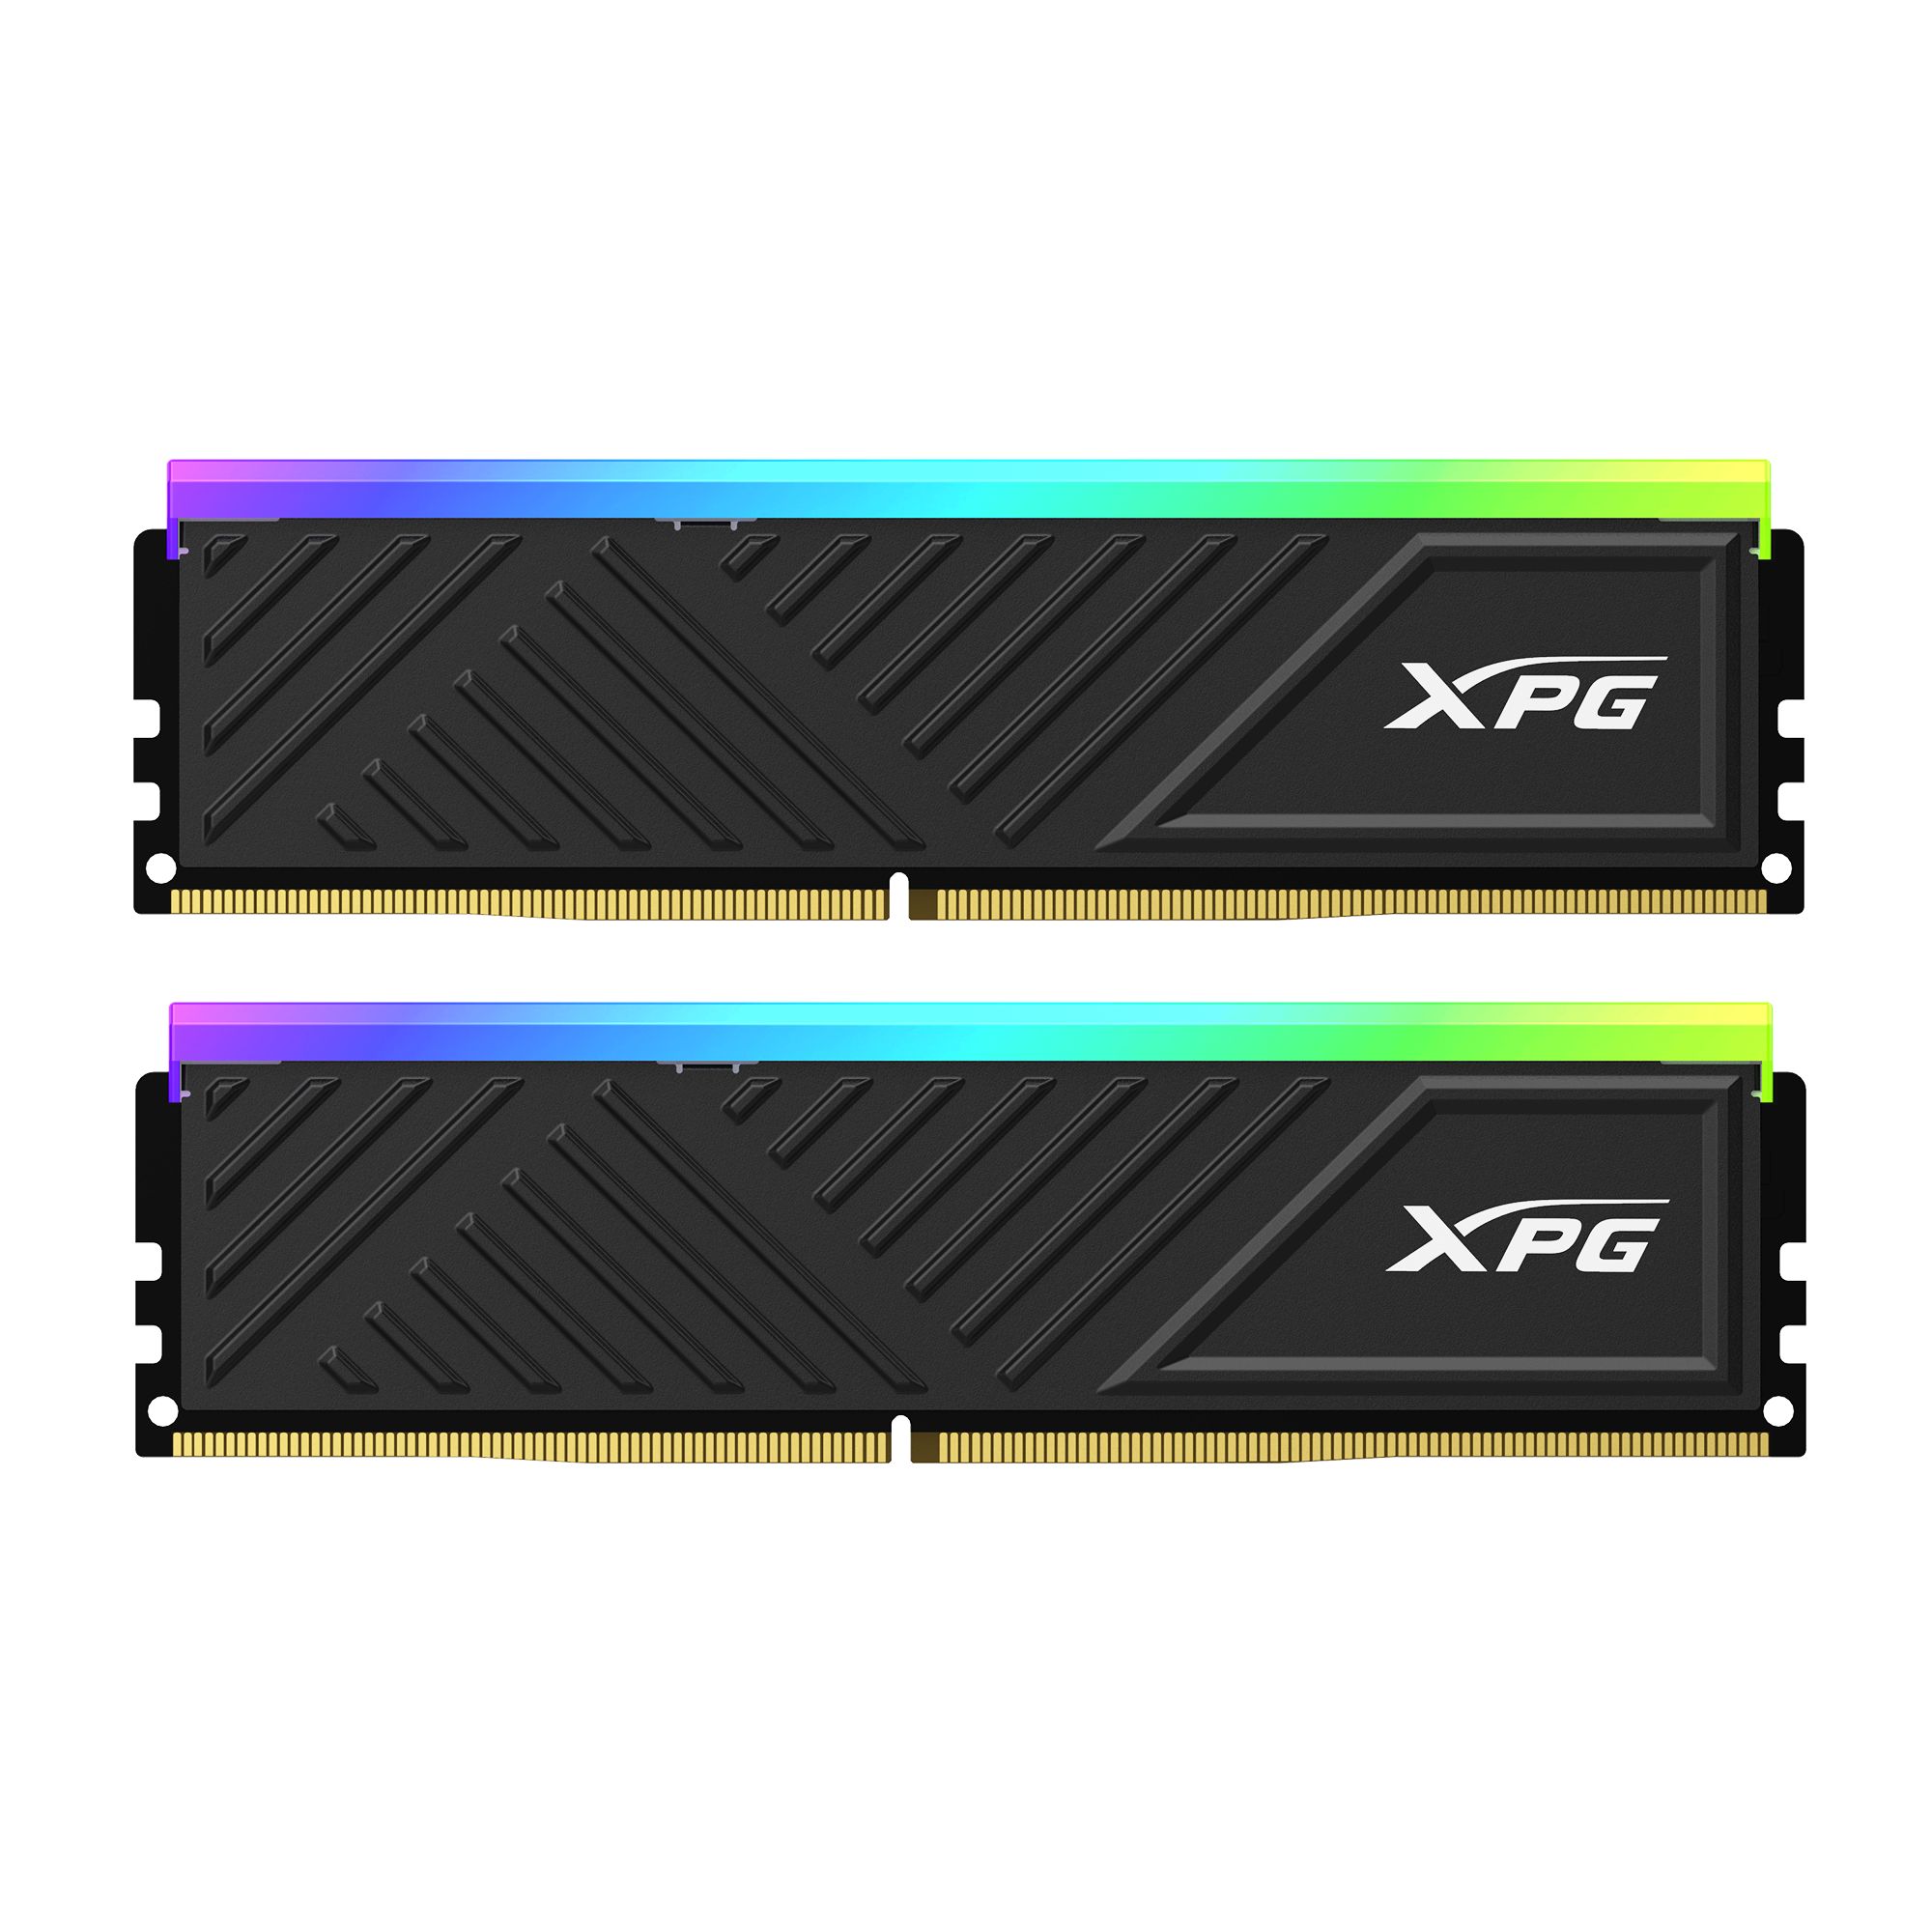 Compact Low-Profile Heatsink Design Top Quality RAM for High Durability Customizable RGB Light Effects Works with the Latest AMD Platforms Supports Intel XMP 2.0 for easy overclocking RoHS compliant Operating temperature: 0°C to 85°C Storage temperature: -20°C to 65°C Operating voltage: 1.35V_1